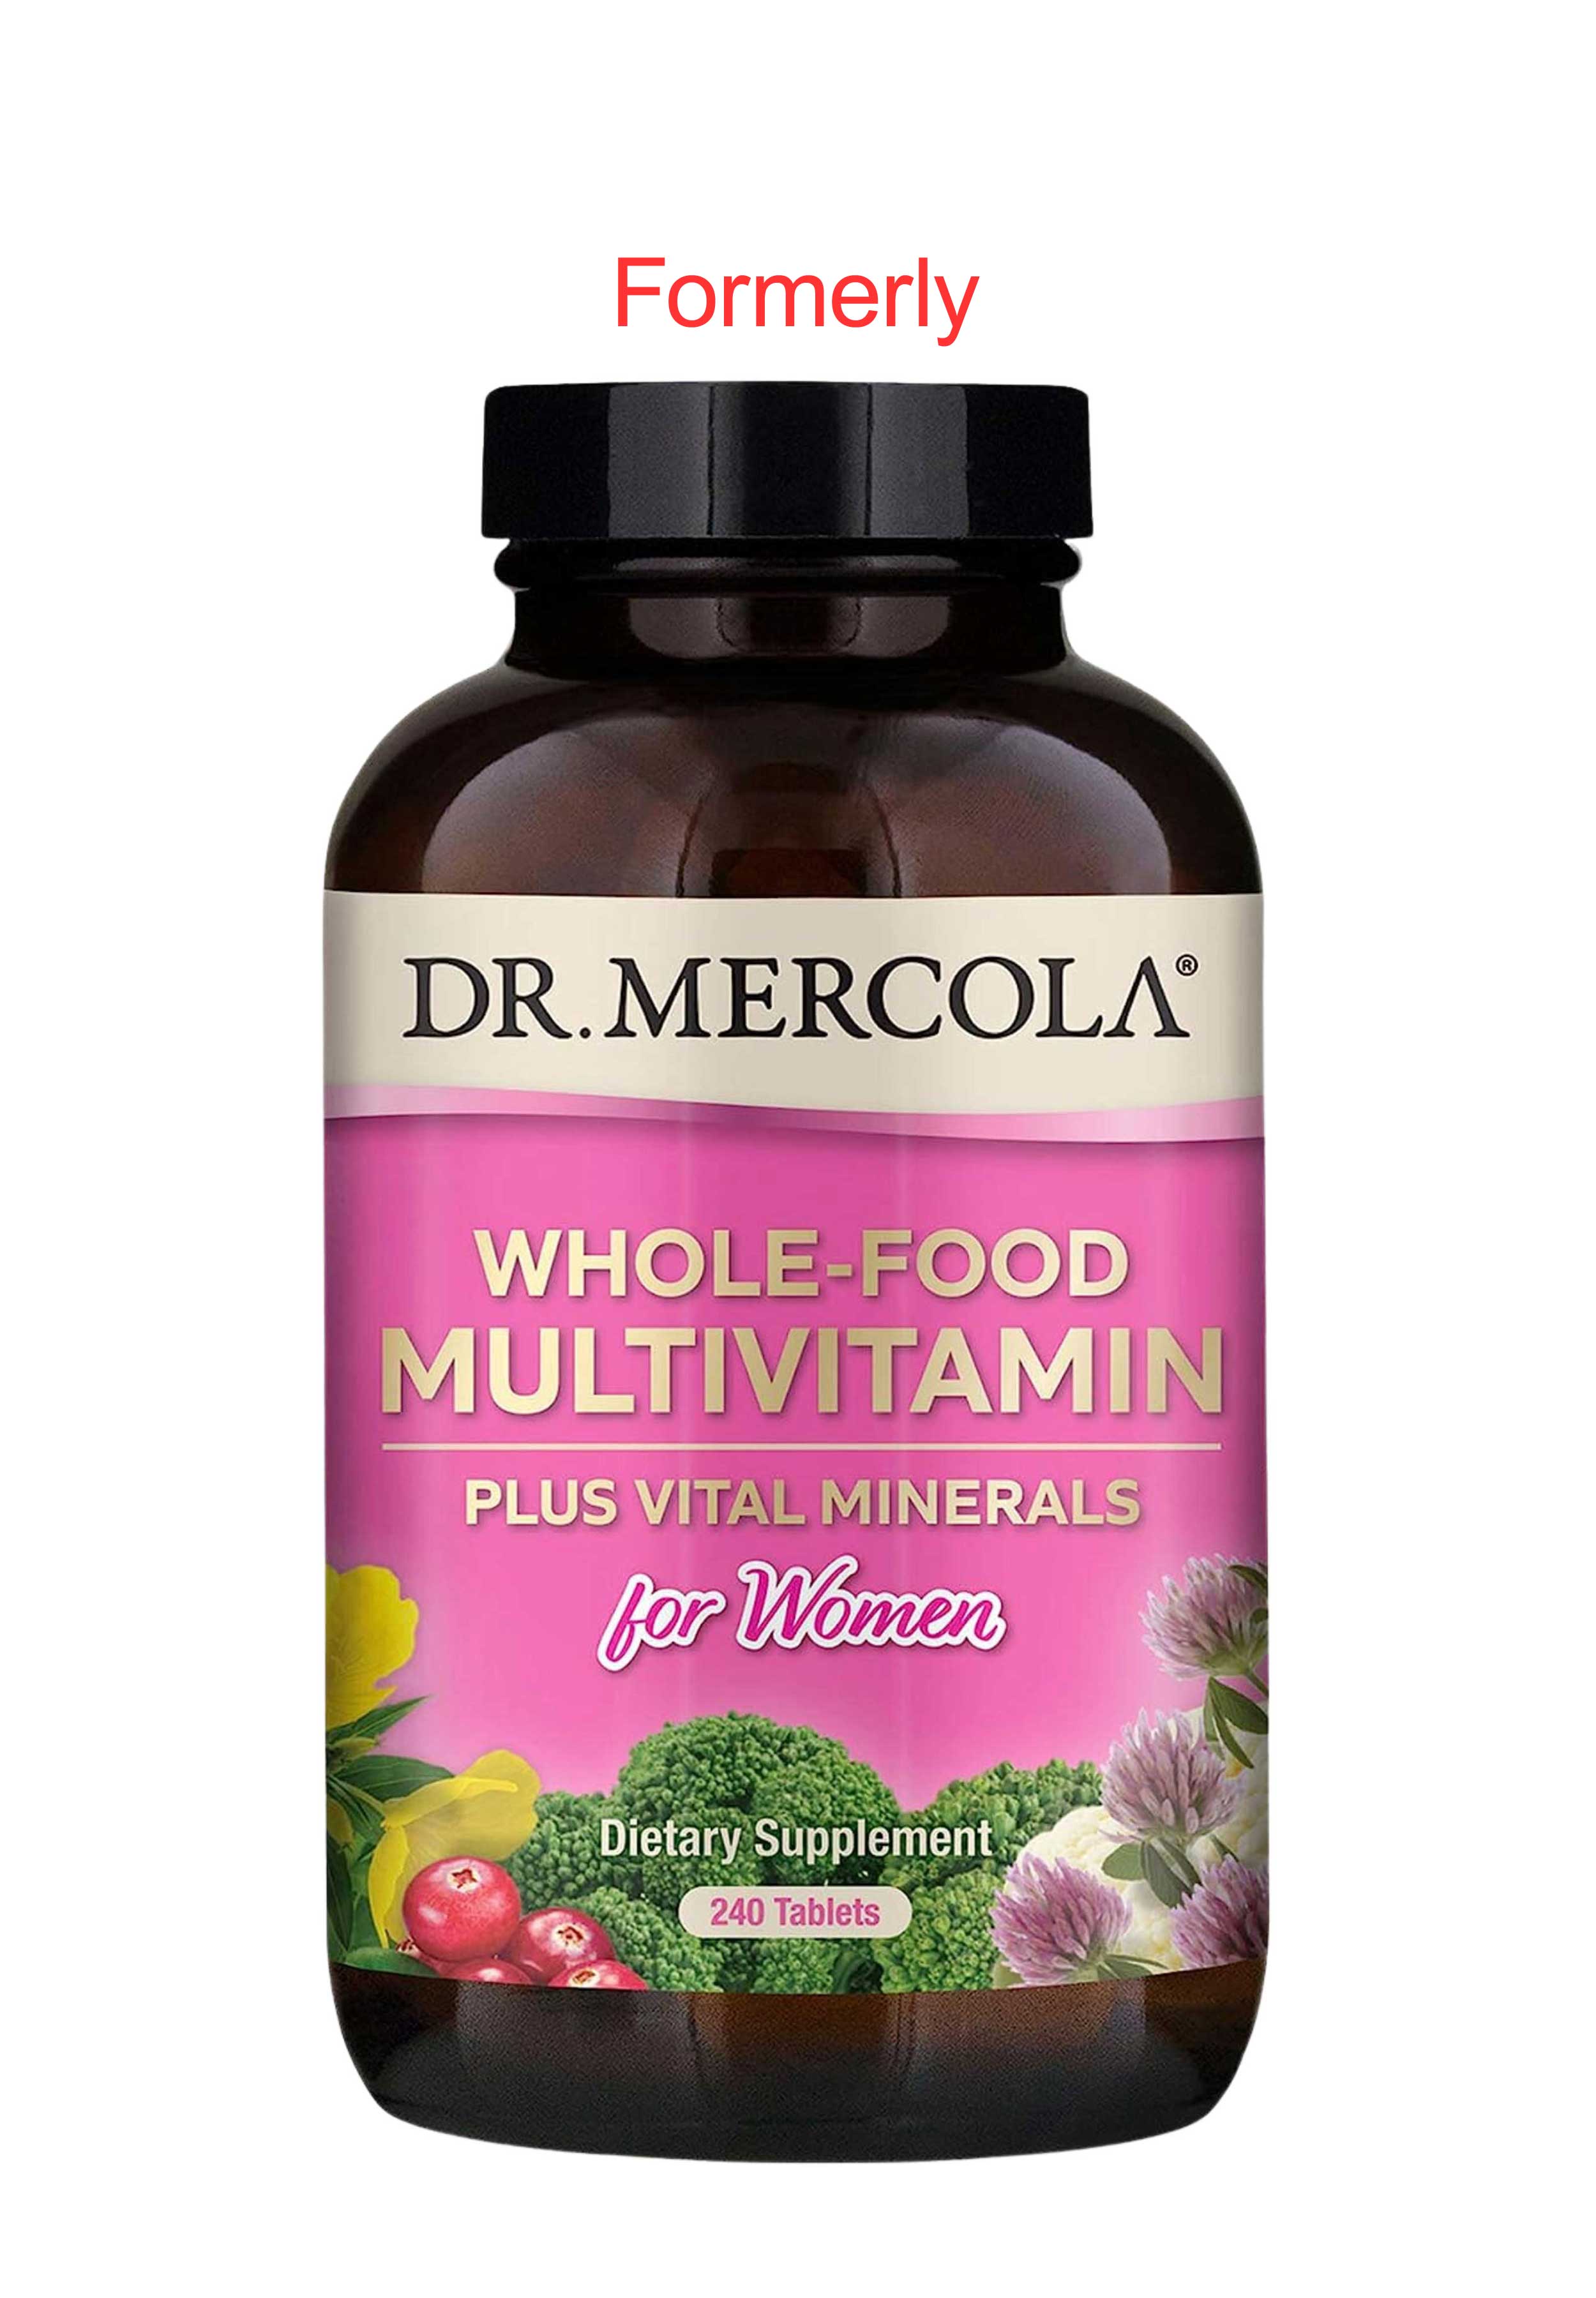 Dr. Mercola Whole-Food Complex with added Multivitamin (Formerly Whole Food Multivitamin) Formerly